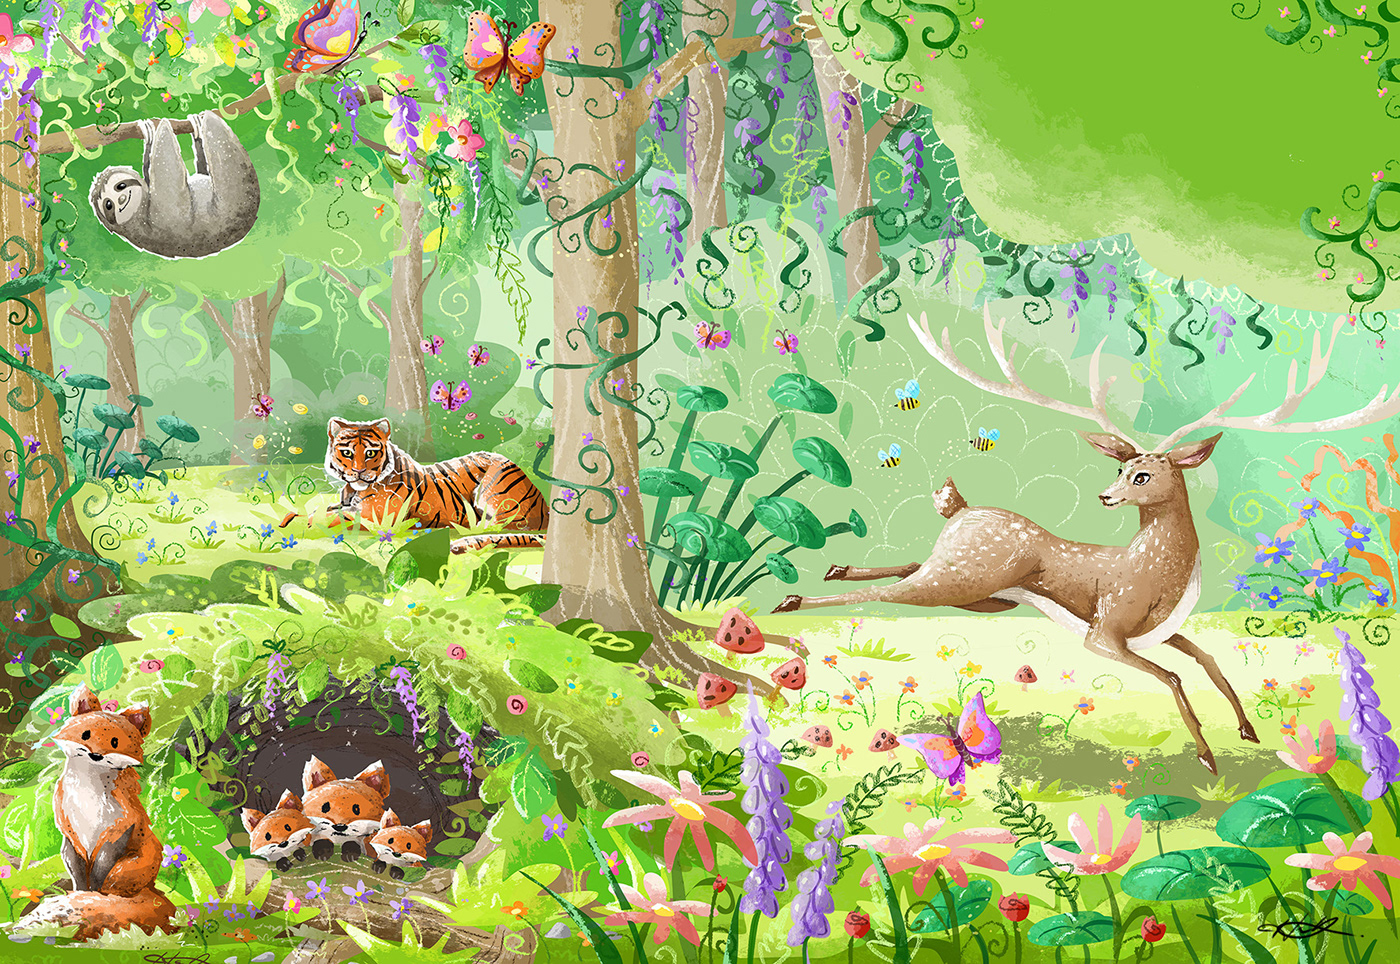 butterfly deer Flowers forset FOX jungle sloth tiger trees